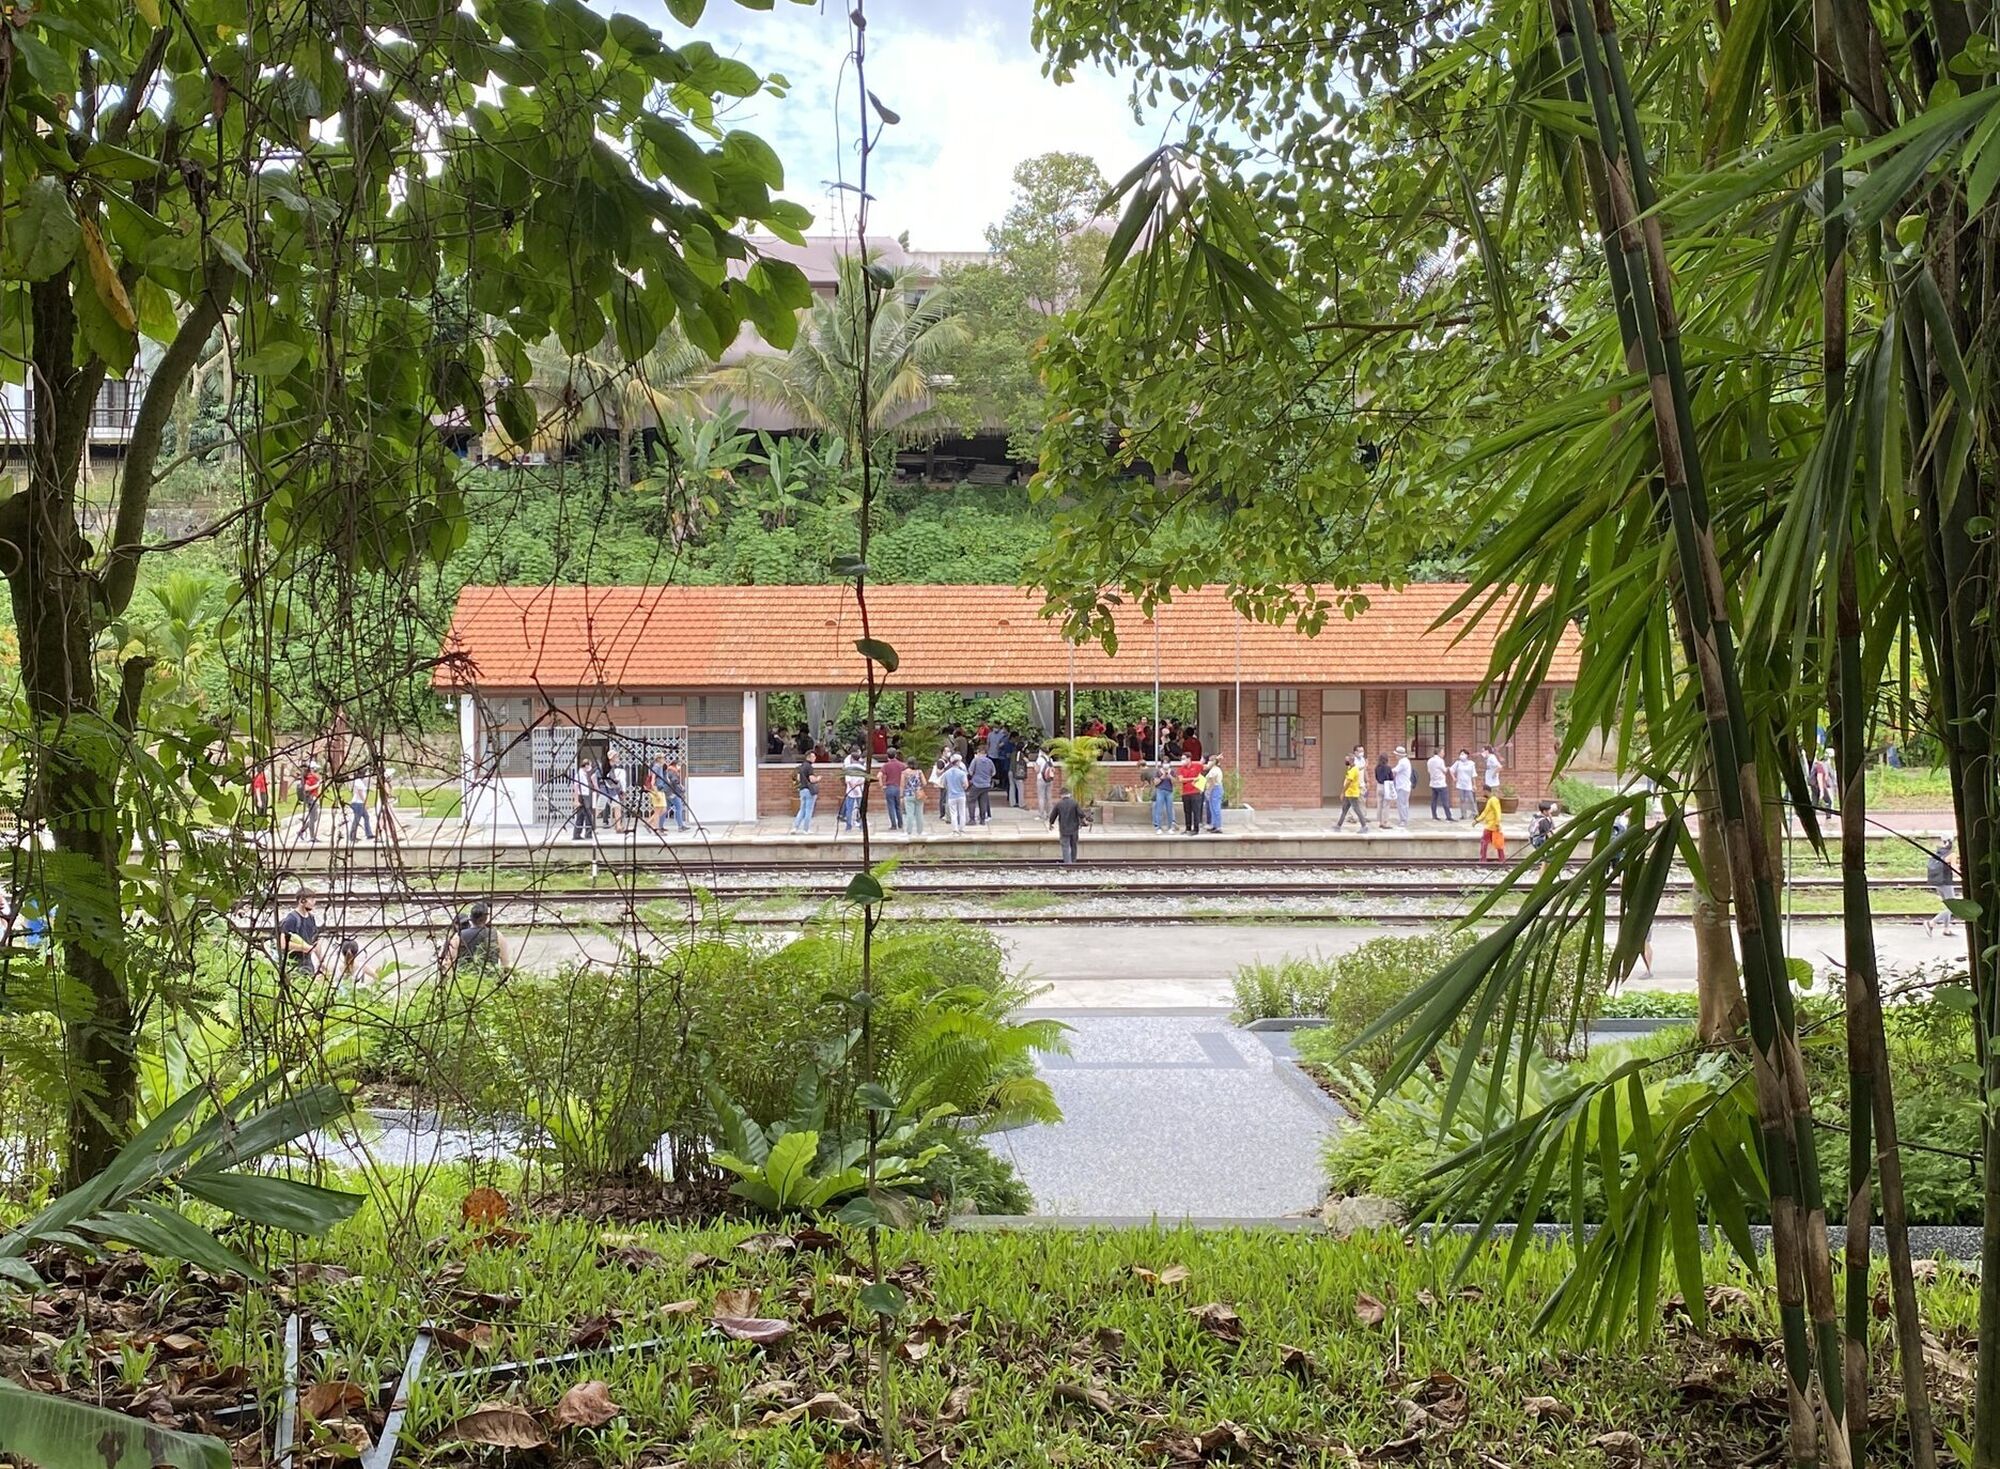 Bukit Timah Railway Station node landscape designed by Grant Associates opens to the public in Singapore